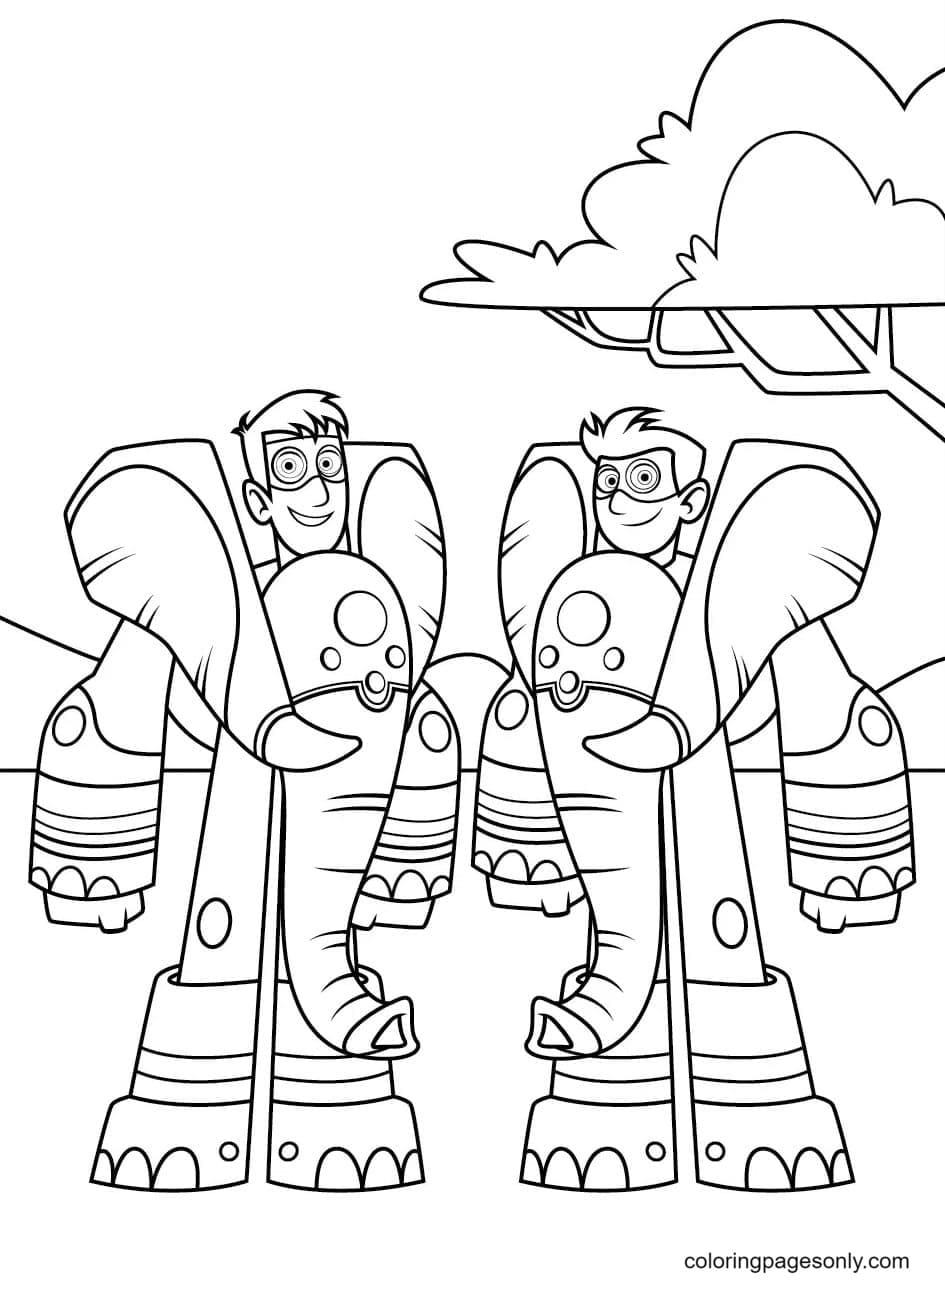 Chris 和 Martin 通过 Creature Power Suits Coloring Page 变成了大象